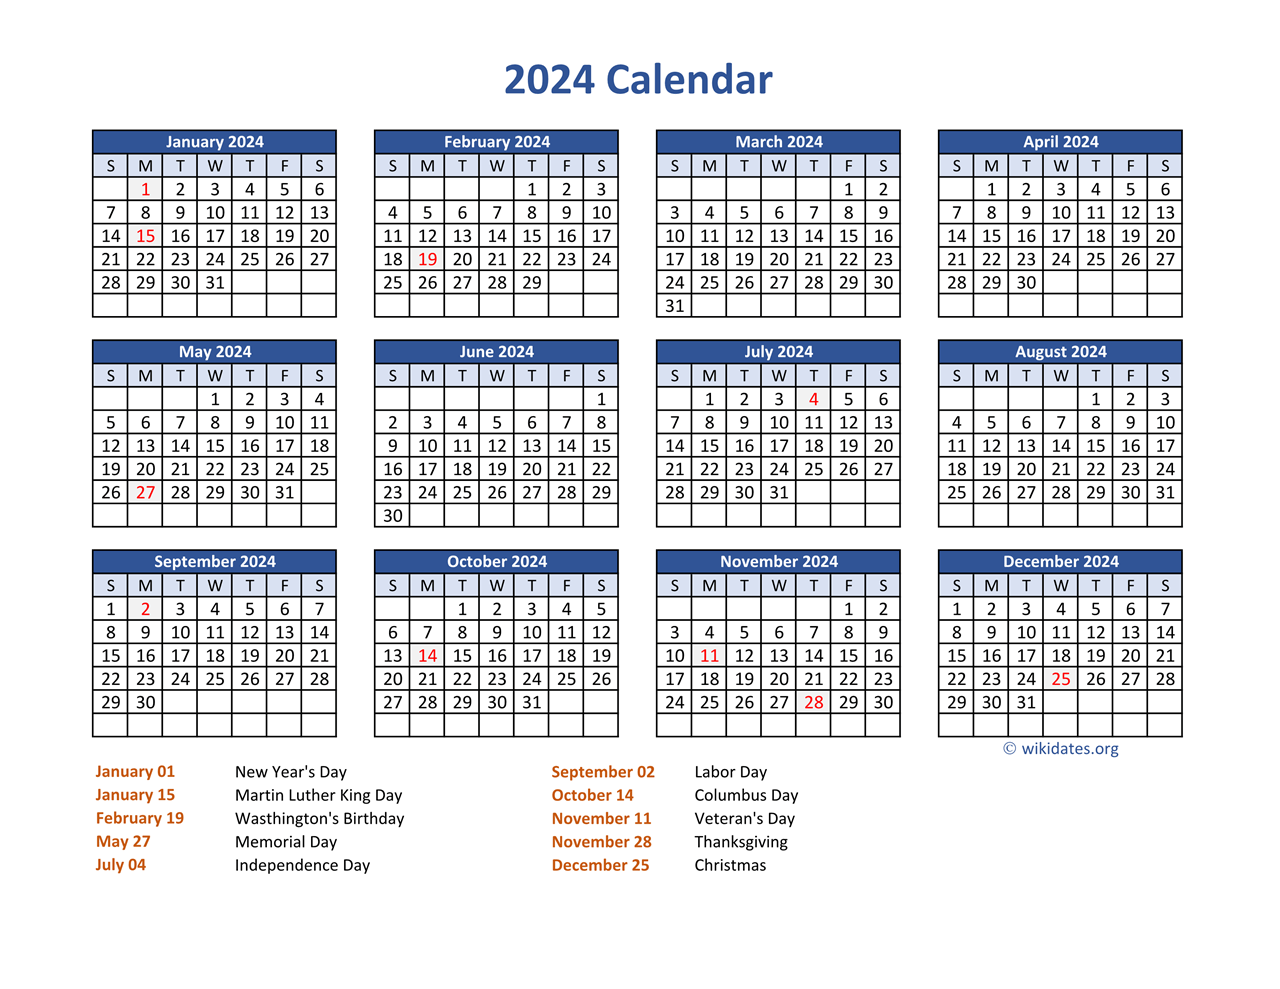 Pdf Calendar 2024 With Federal Holidays | Wikidates for Printable Calendar 2024 With Holidays Free